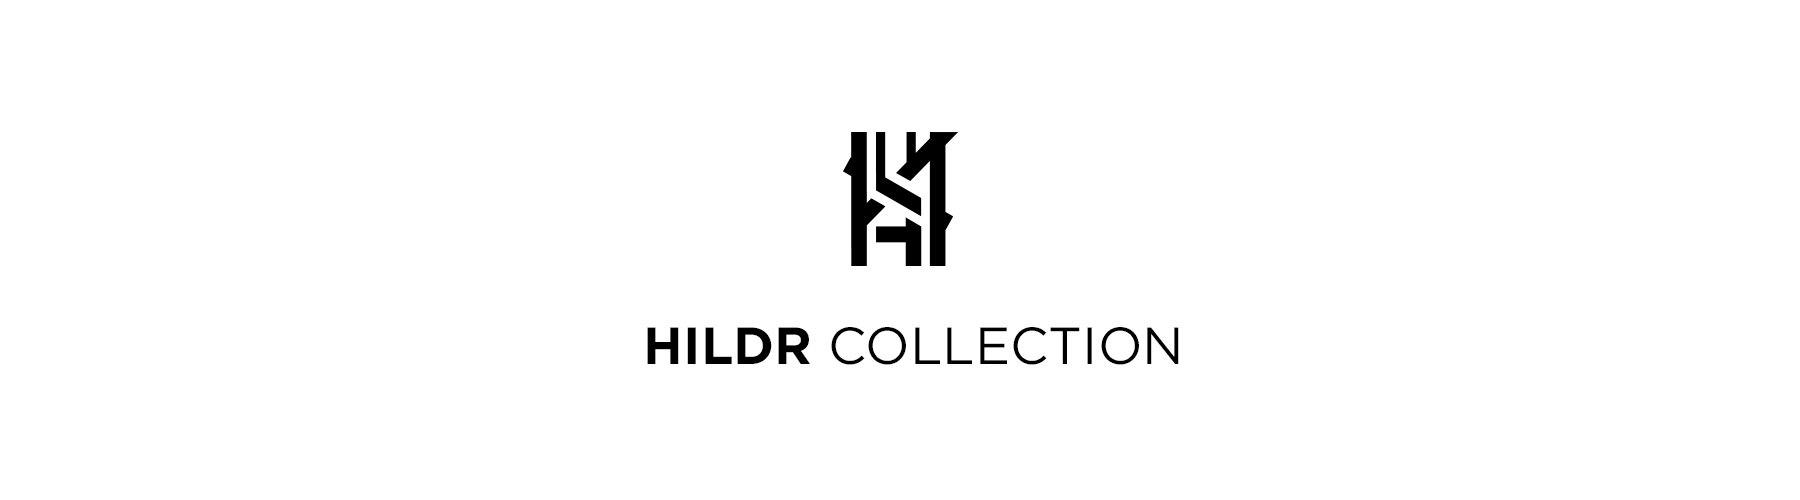 Hildr Collection